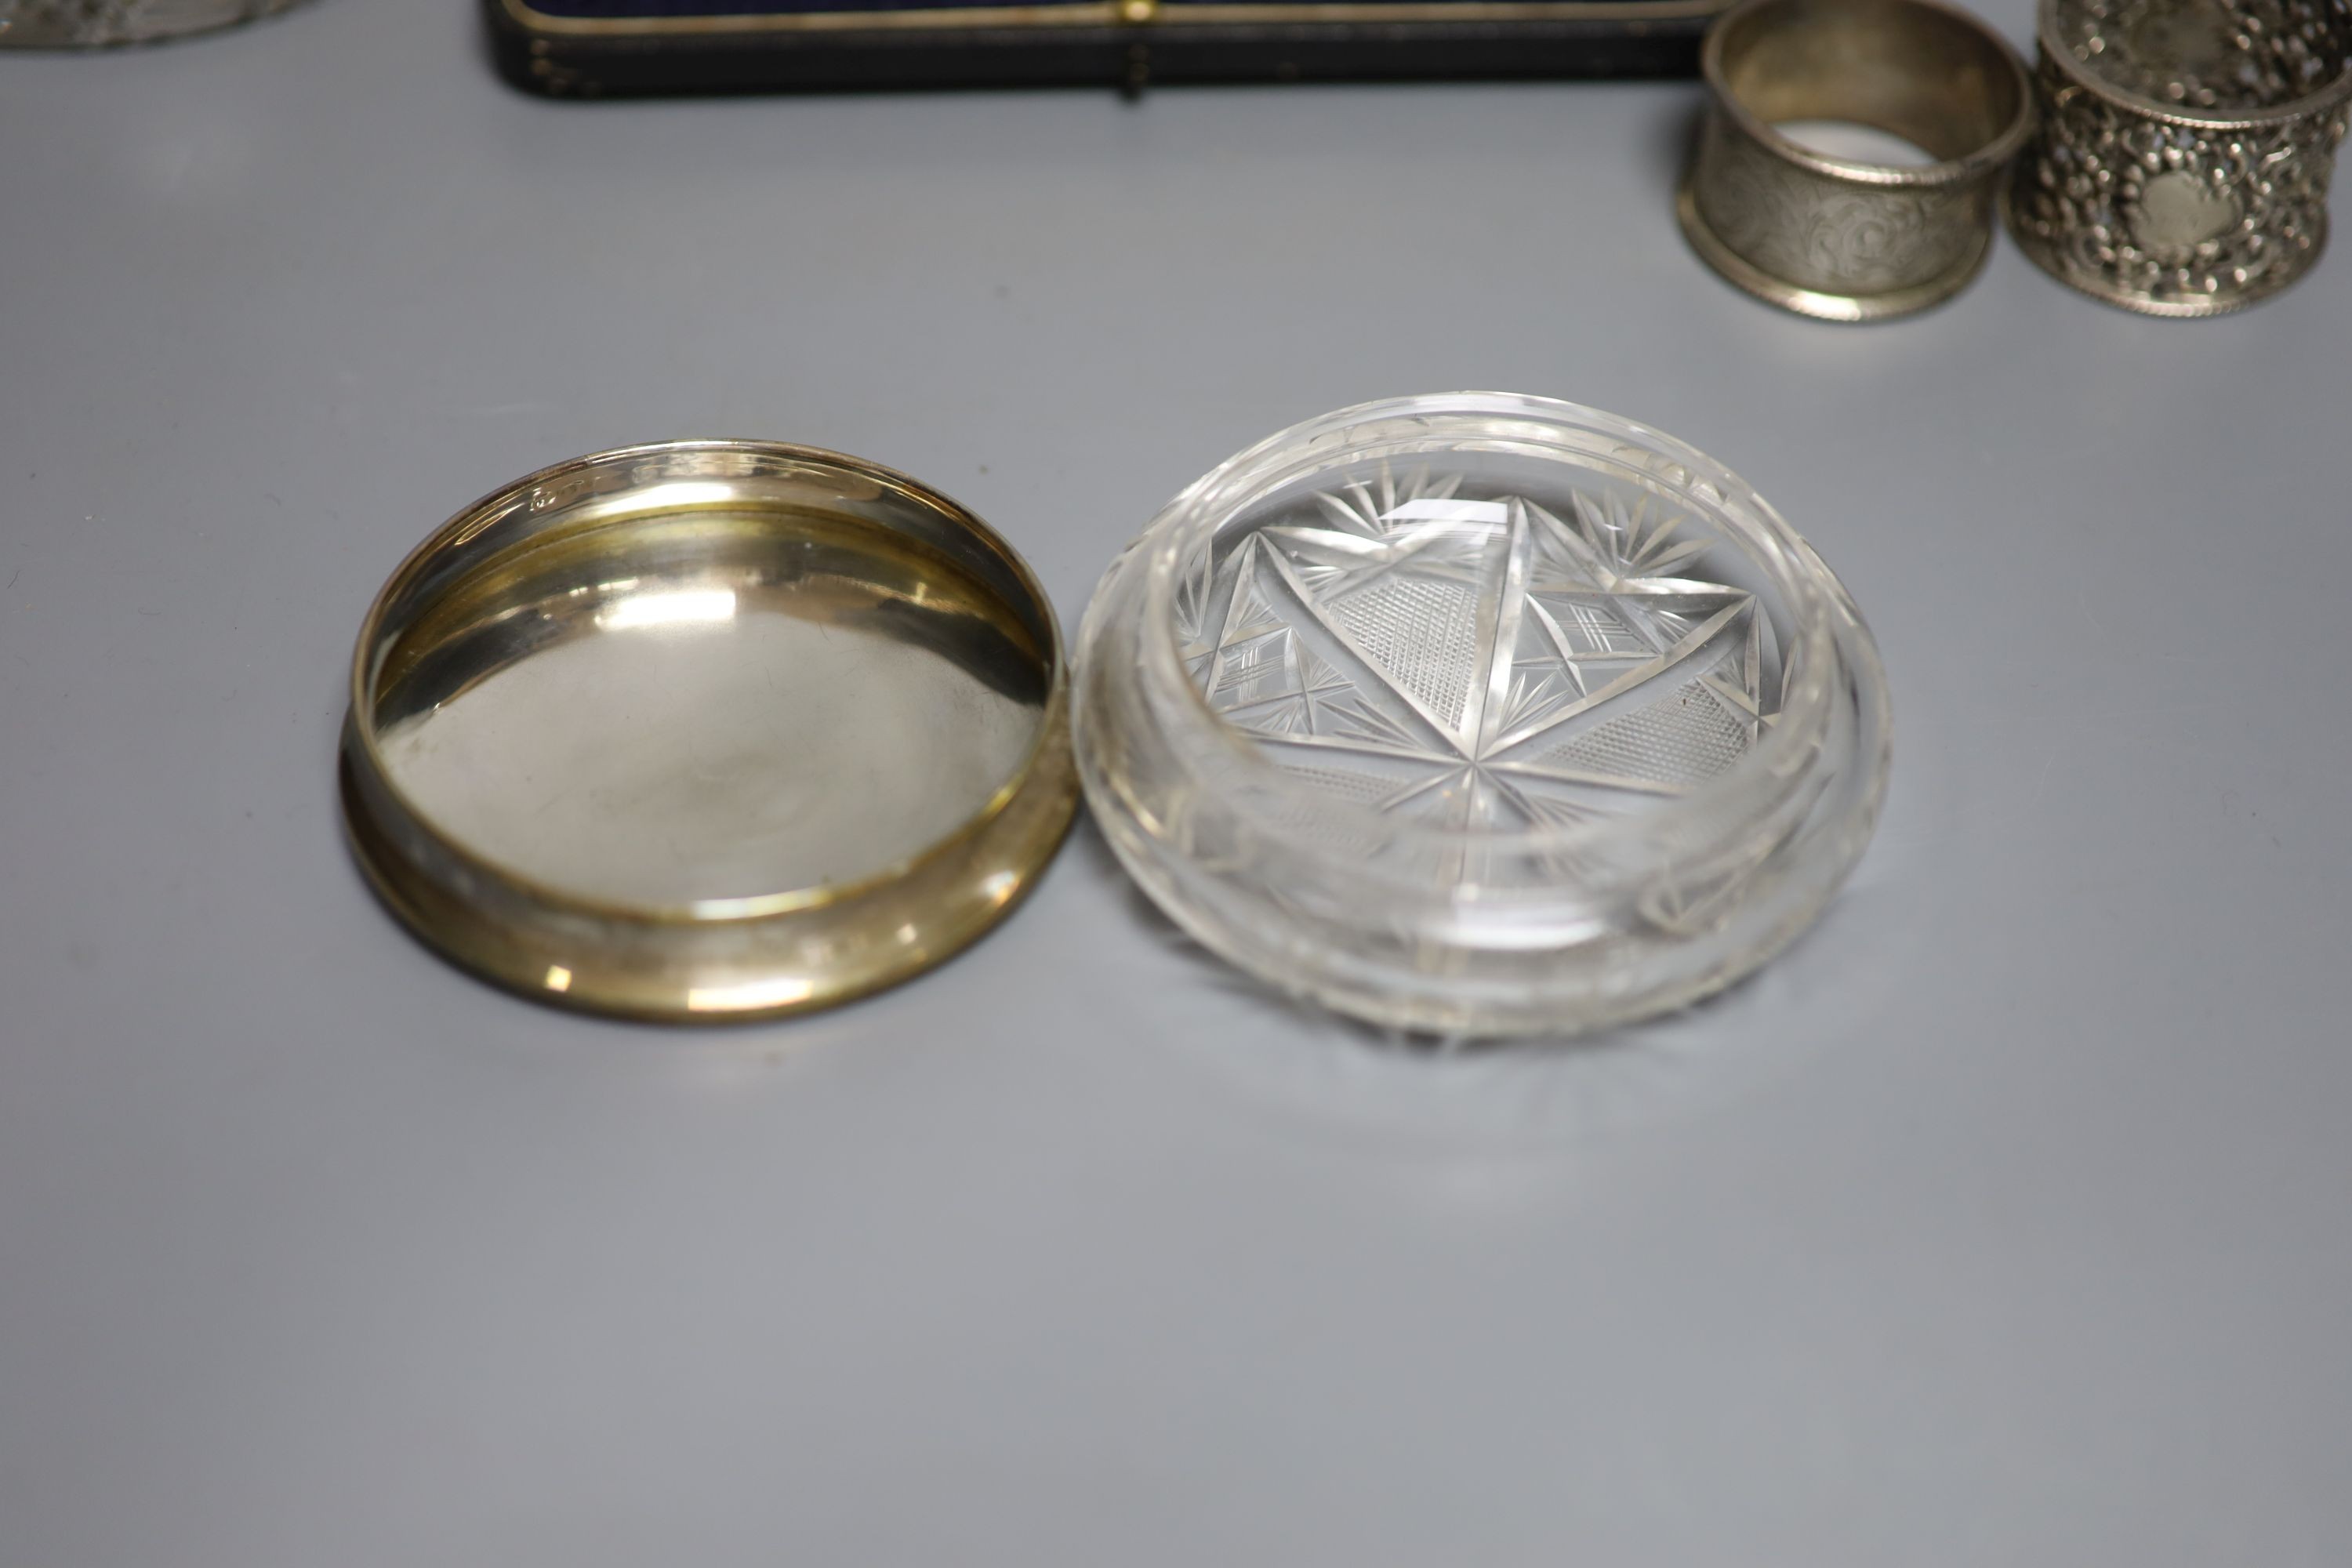 A glass silver mounted inkwell, 2 napkin rings boxed silver dishes and an enamel box - Image 6 of 6